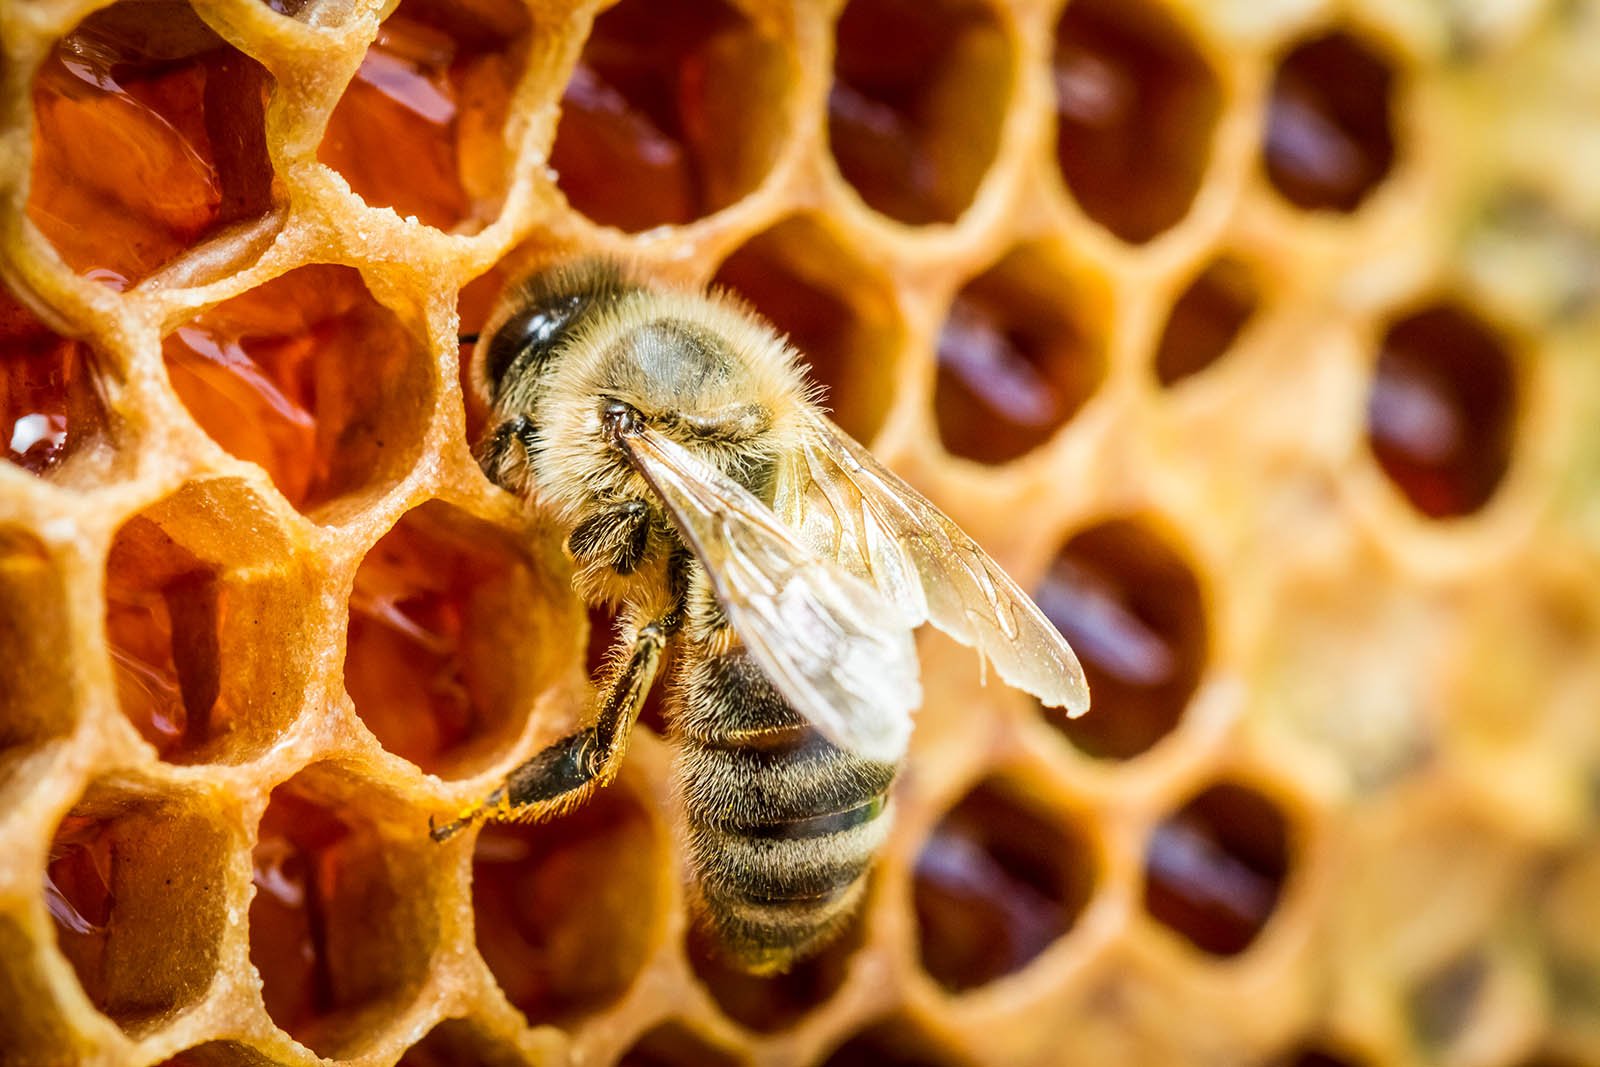 bees-in-a-beehive-on-honeycomb-2022-04-07-23-24-04-utc